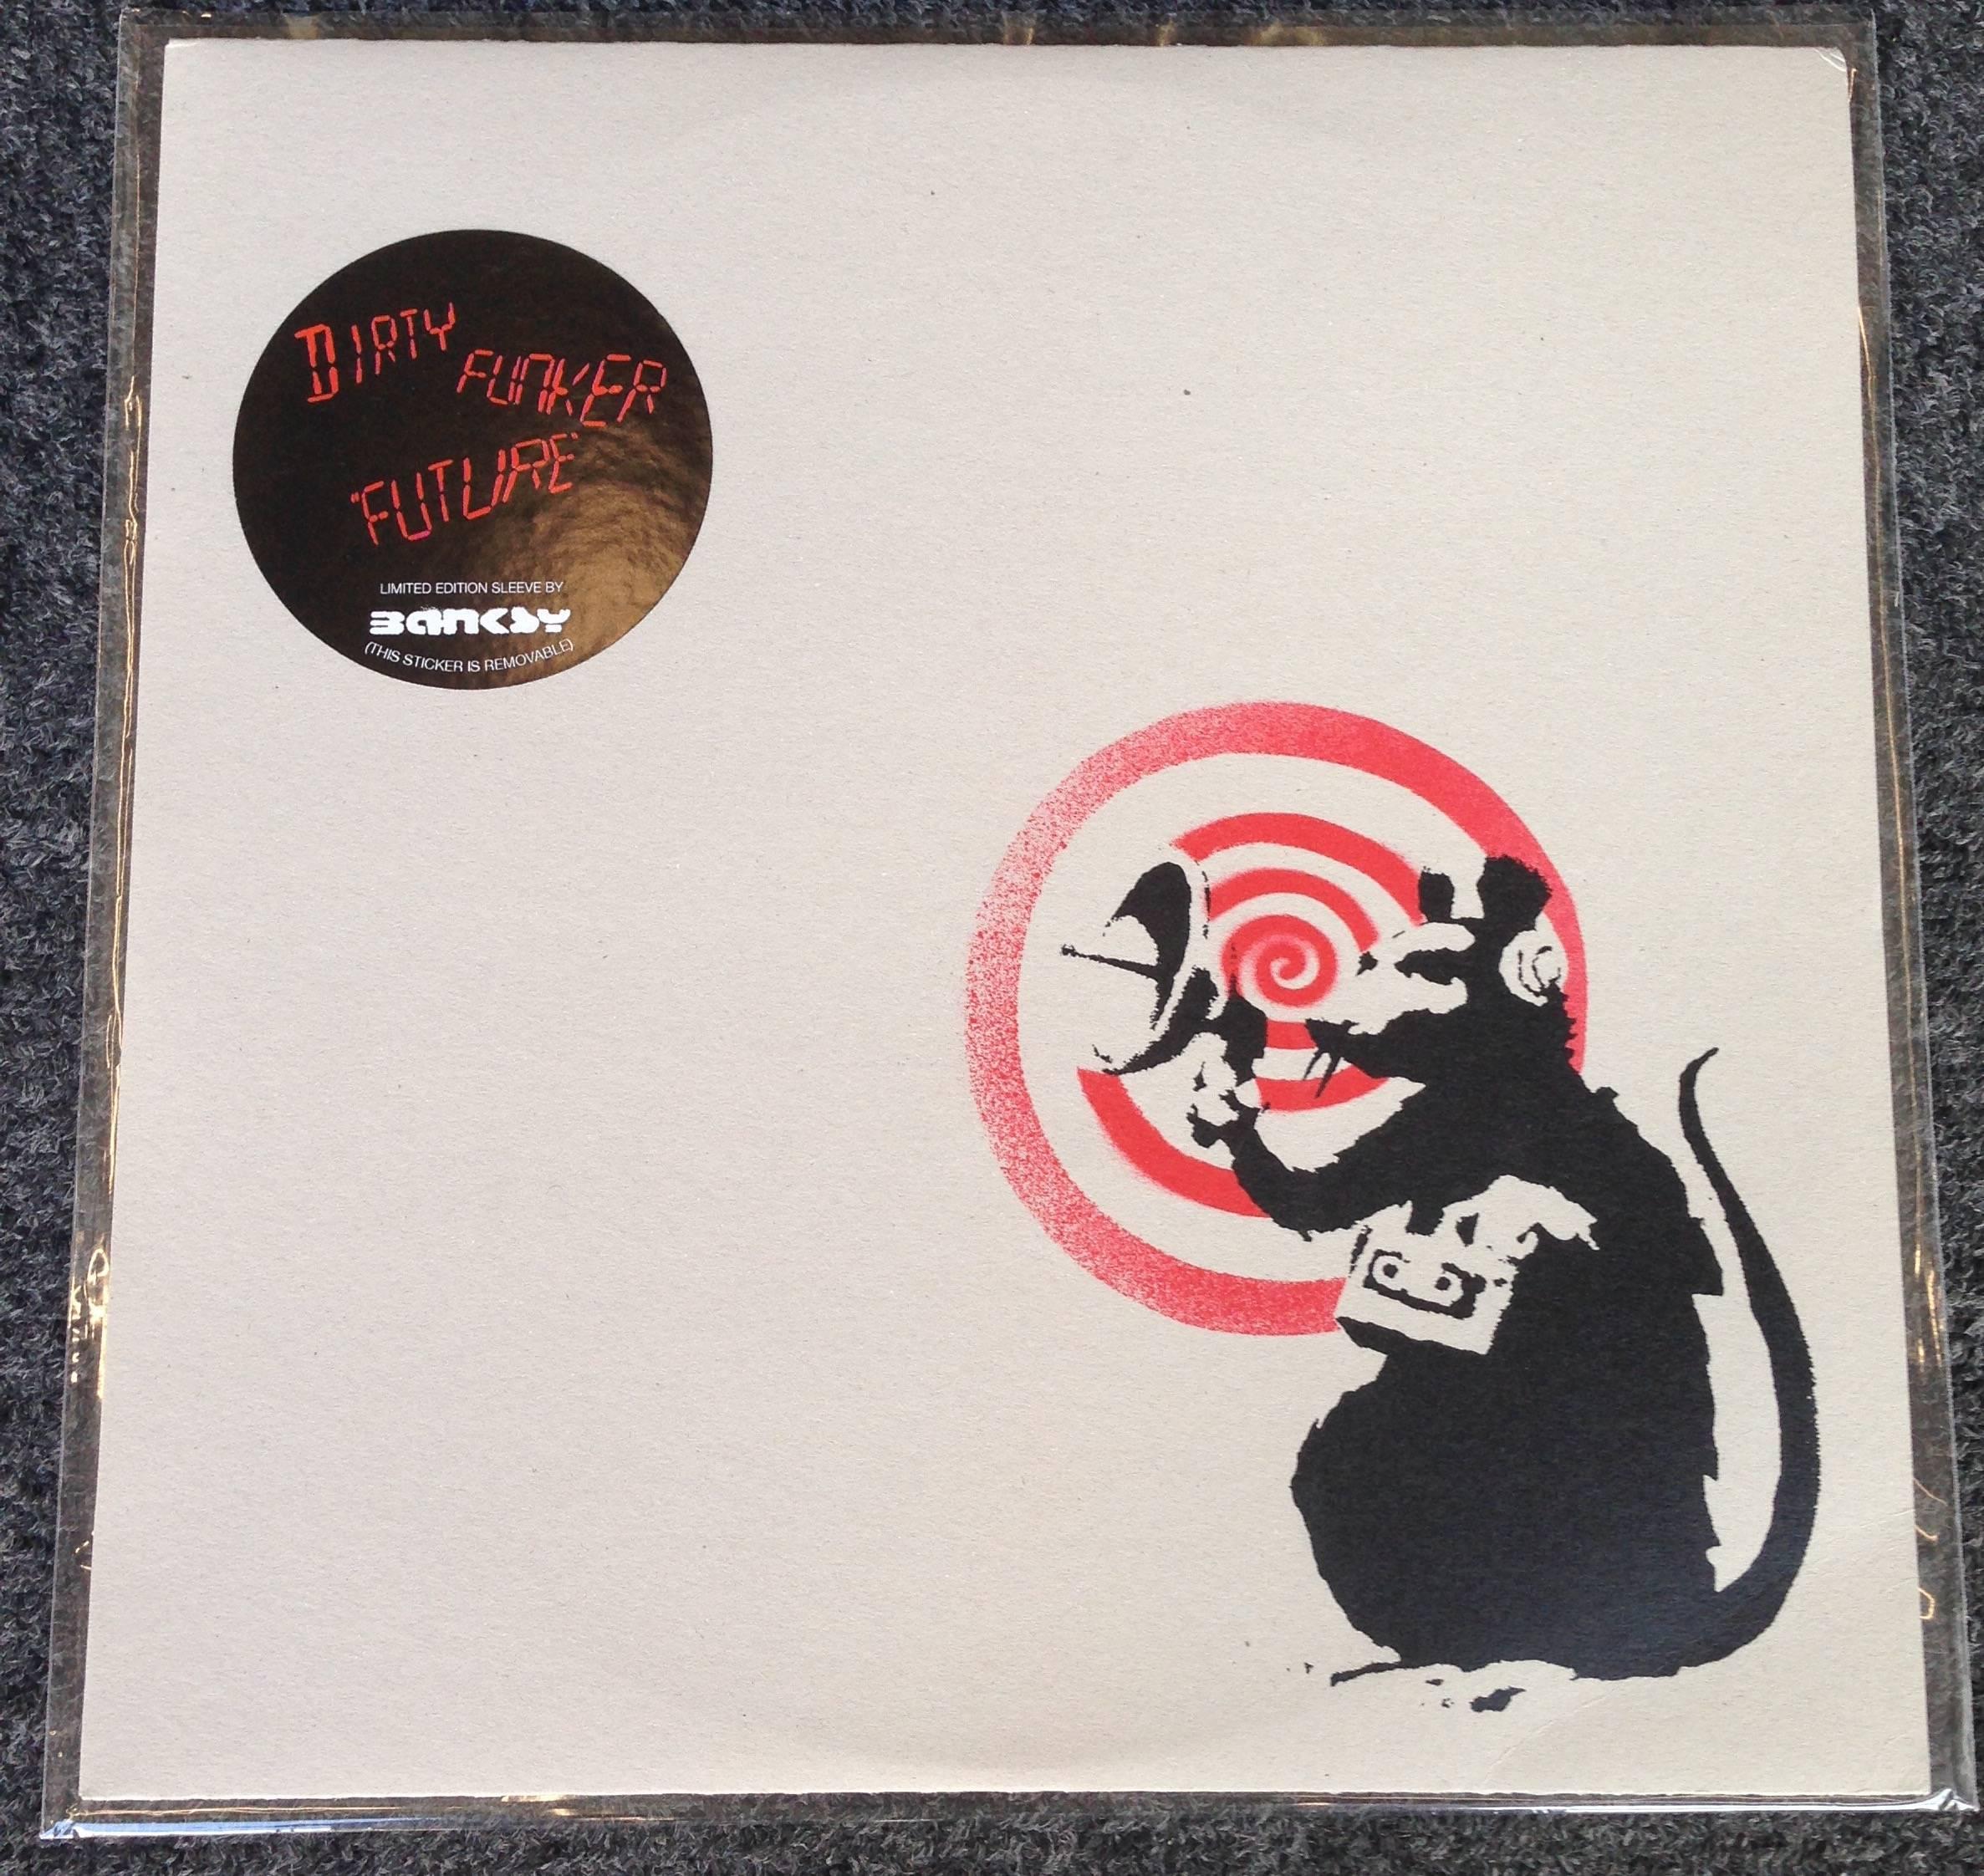 Banksy produced this cover & record label art for his friends Dirty Funker in 2008. Featured here is Banksy's world renown Radar Rat

Year: 2008

Medium: Color Silkscreen on Record Sleeve and Vinyl Record

Dimensions: 12 x12 in (30 x 30